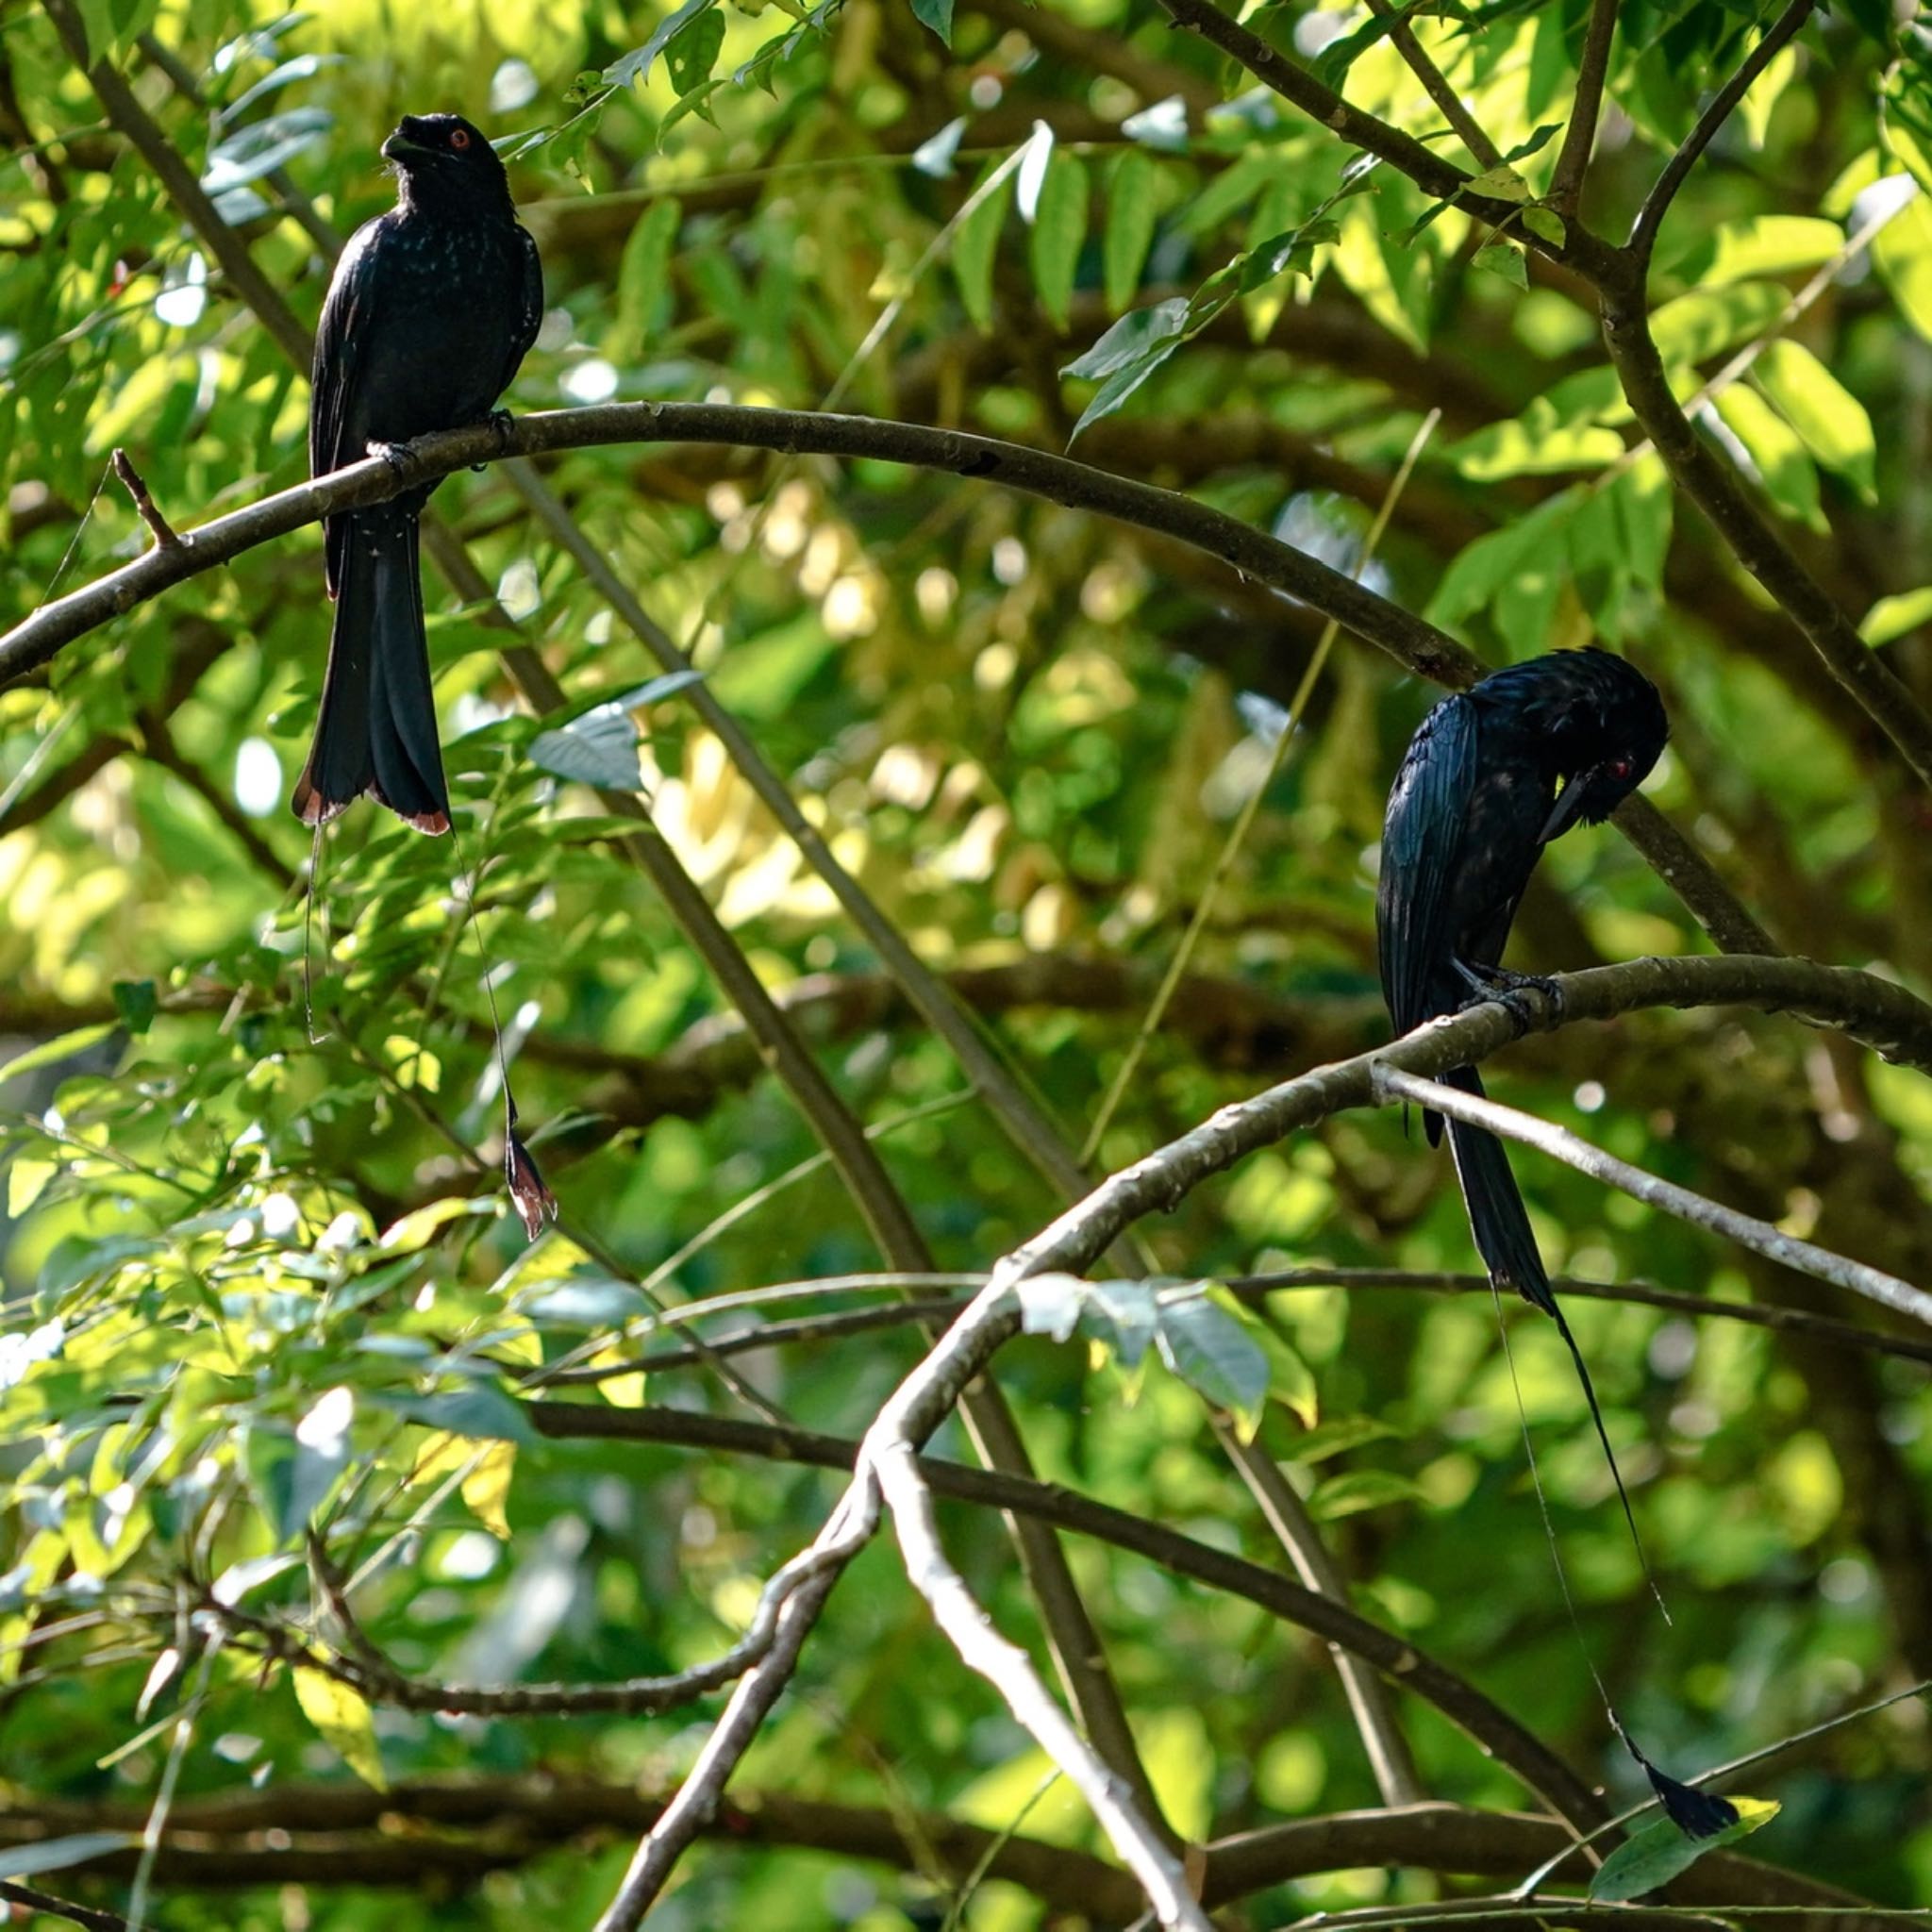 Photo of Greater Racket-tailed Drongo at Dairy Farm Nature Park by T K